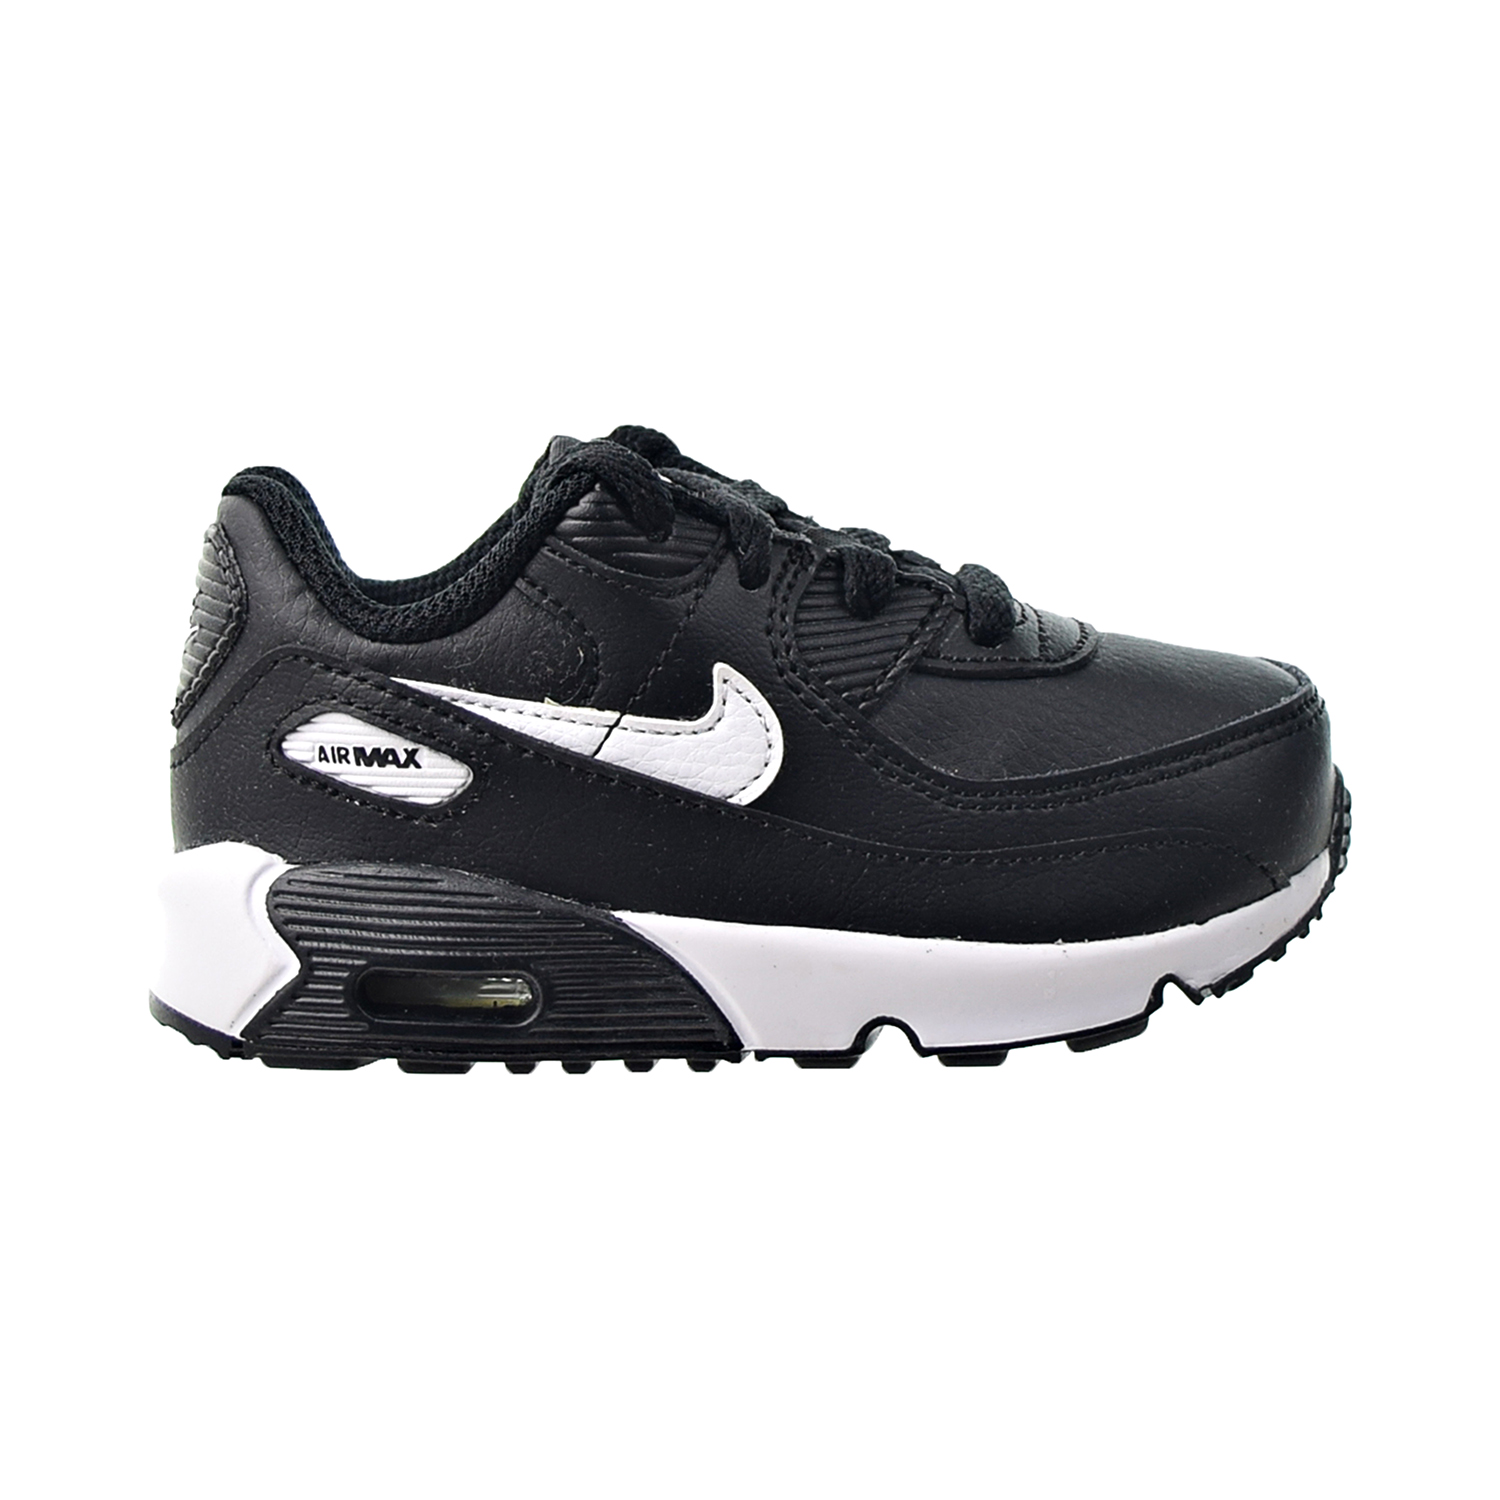 Nike Air Max 90 LTR Toddlers' Shoes Black-Black-White cd6868-010 - image 1 of 6